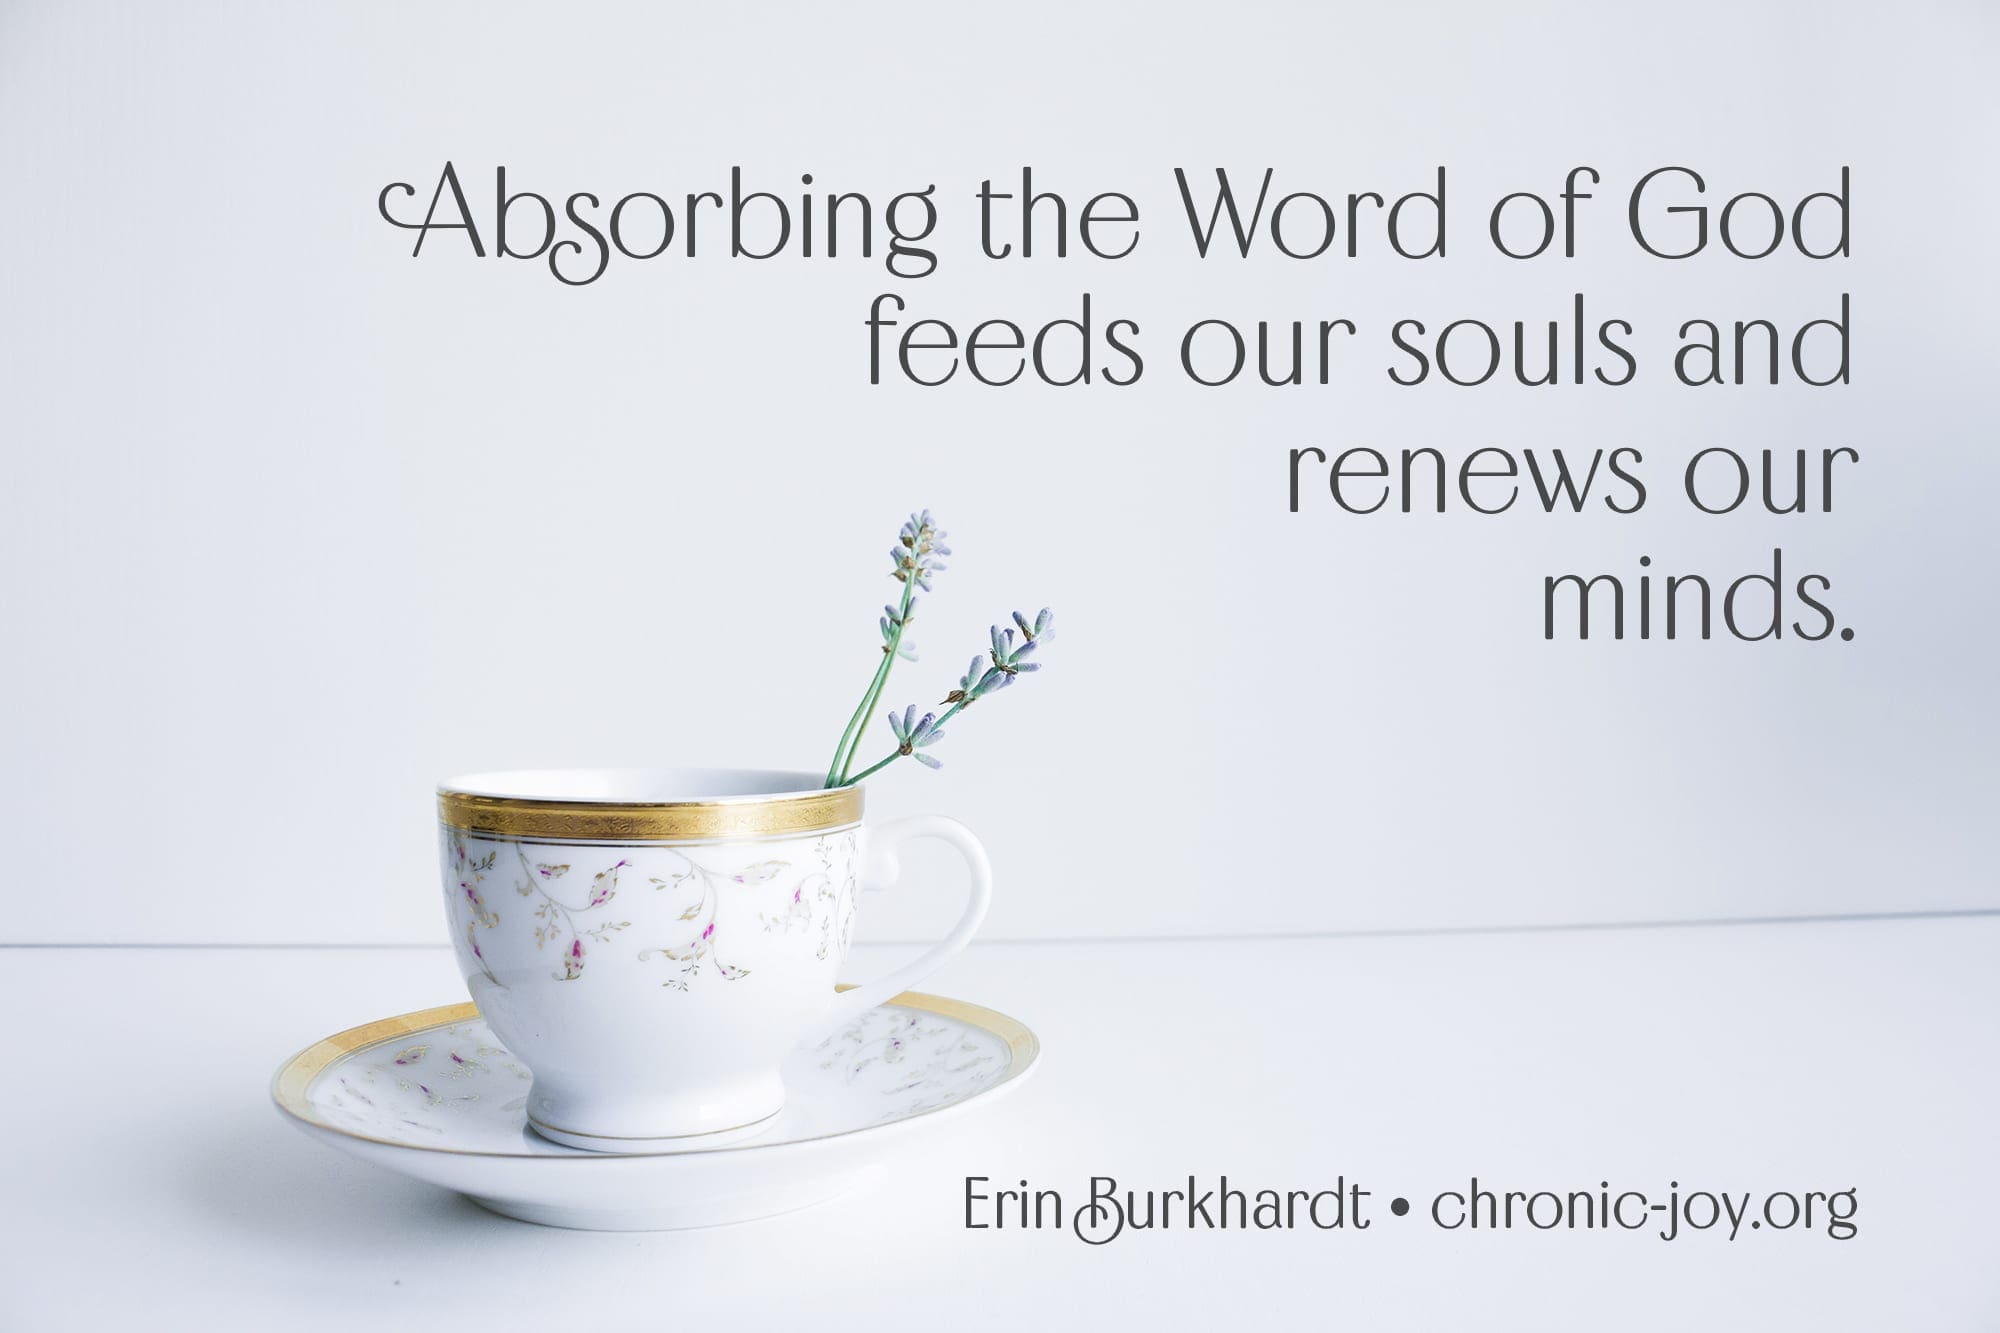 "Absorbing the Word of God feeds our souls and renews our minds." Erin Burkhardt